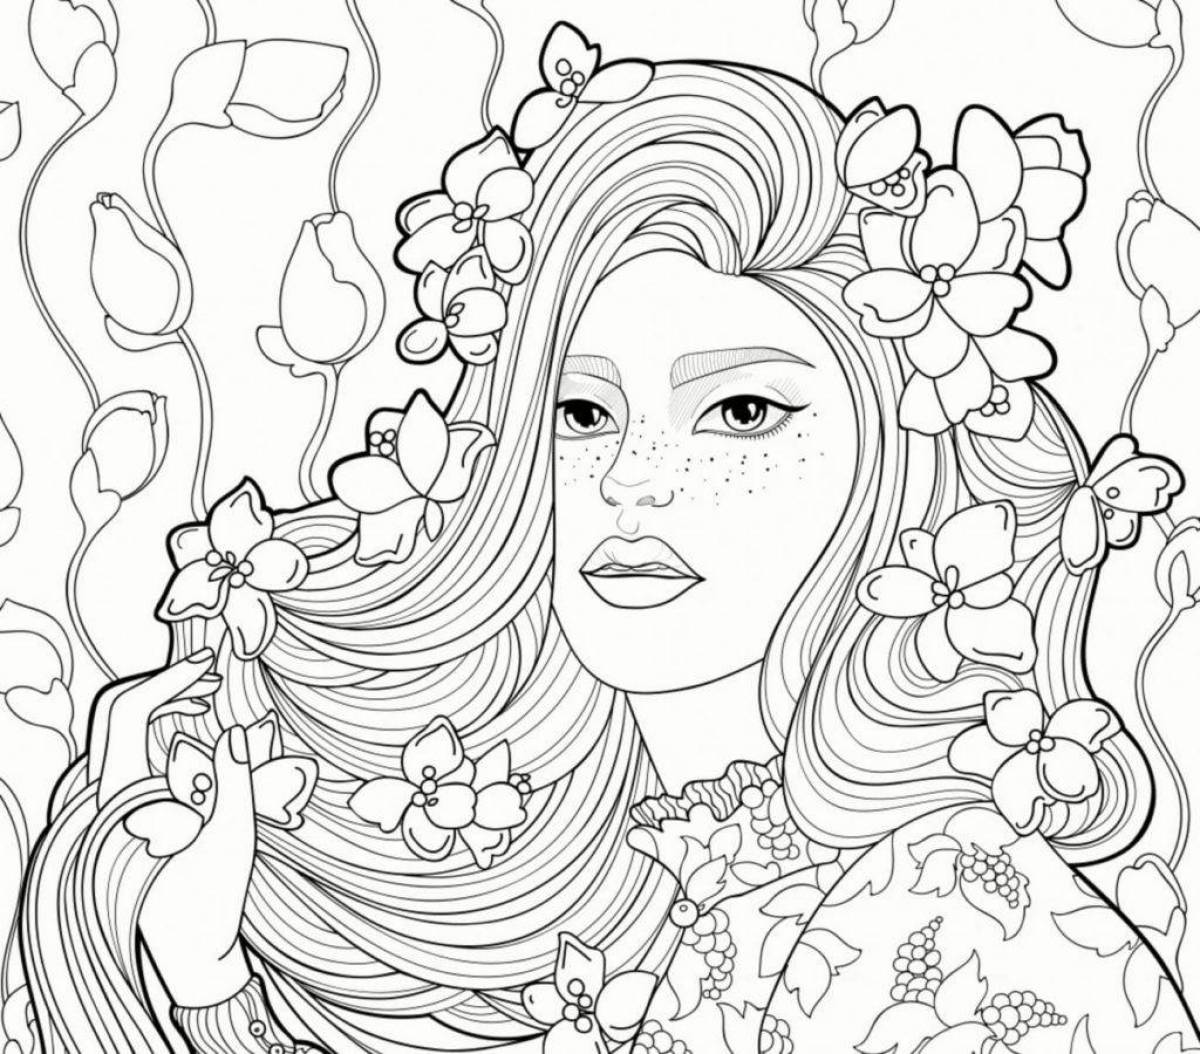 Amazing coloring book for girls 11 years old